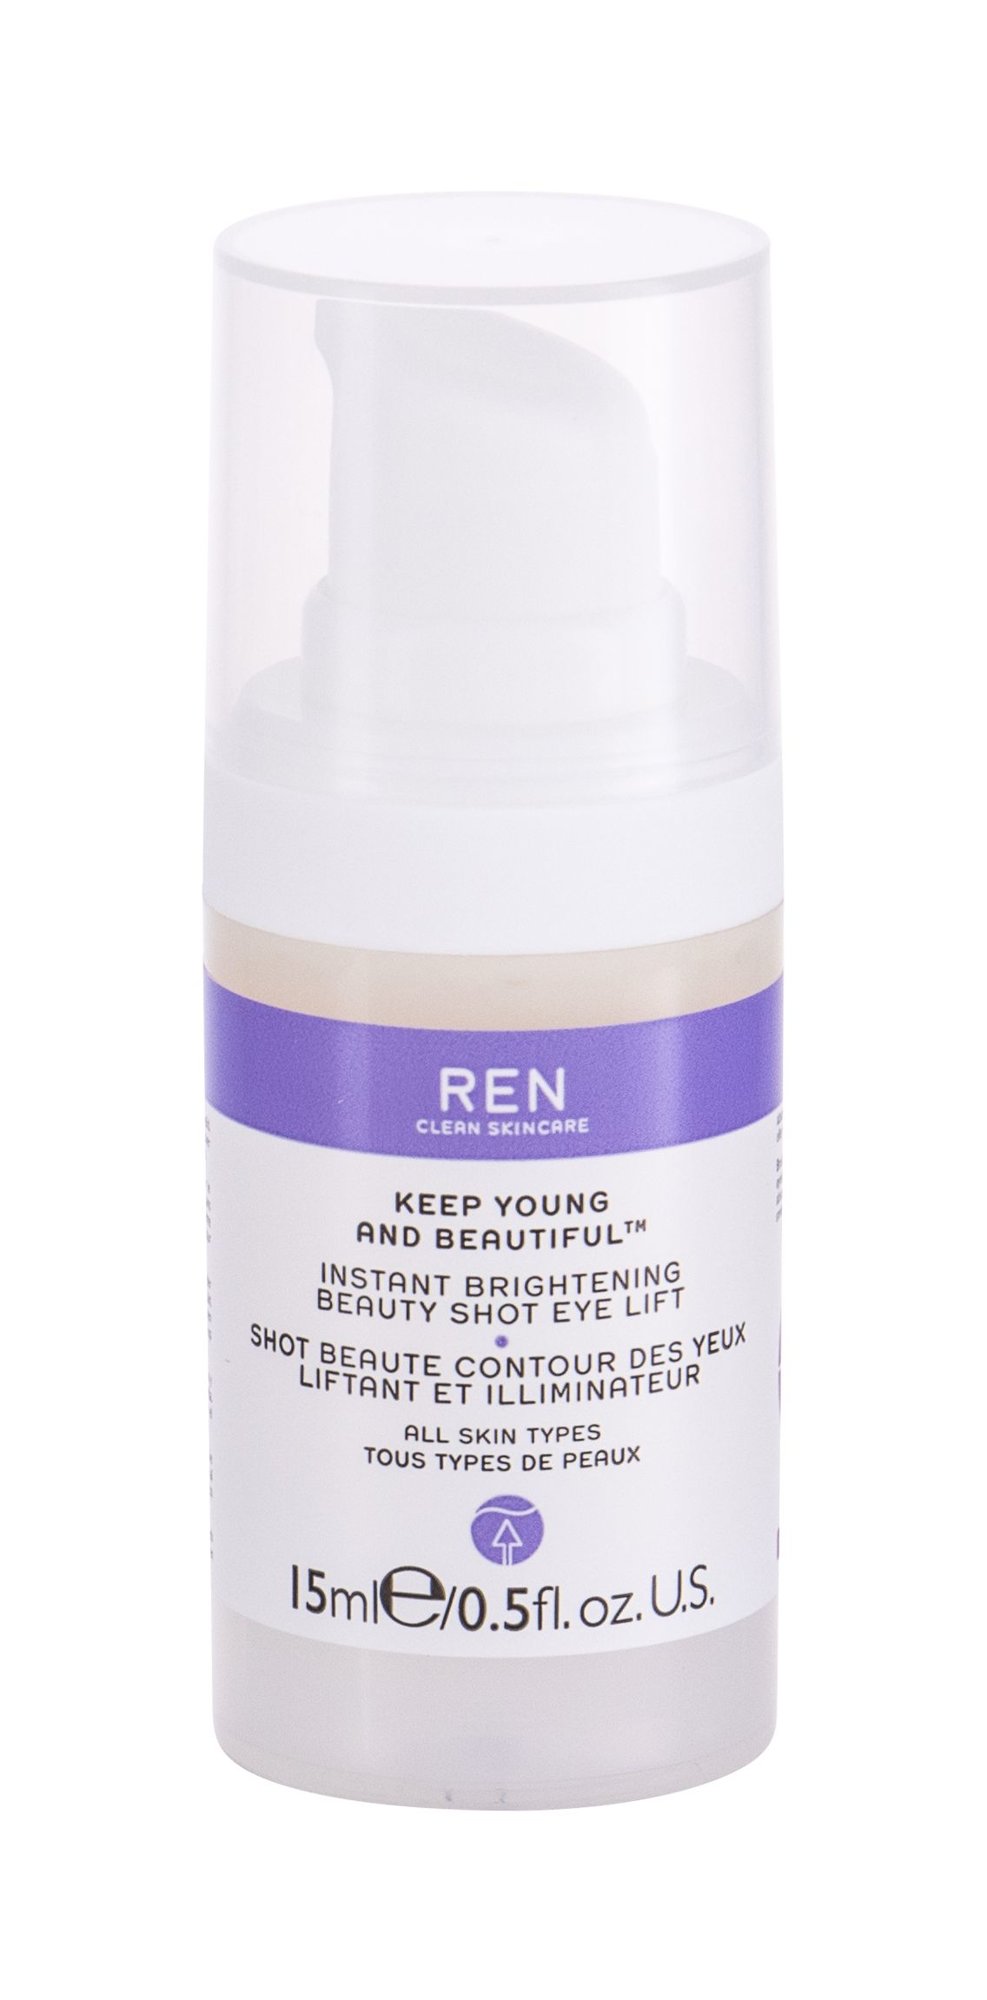 Ren Clean Skincare Keep Young And Beautiful Instant Brightening Beauty Shot paakių gelis